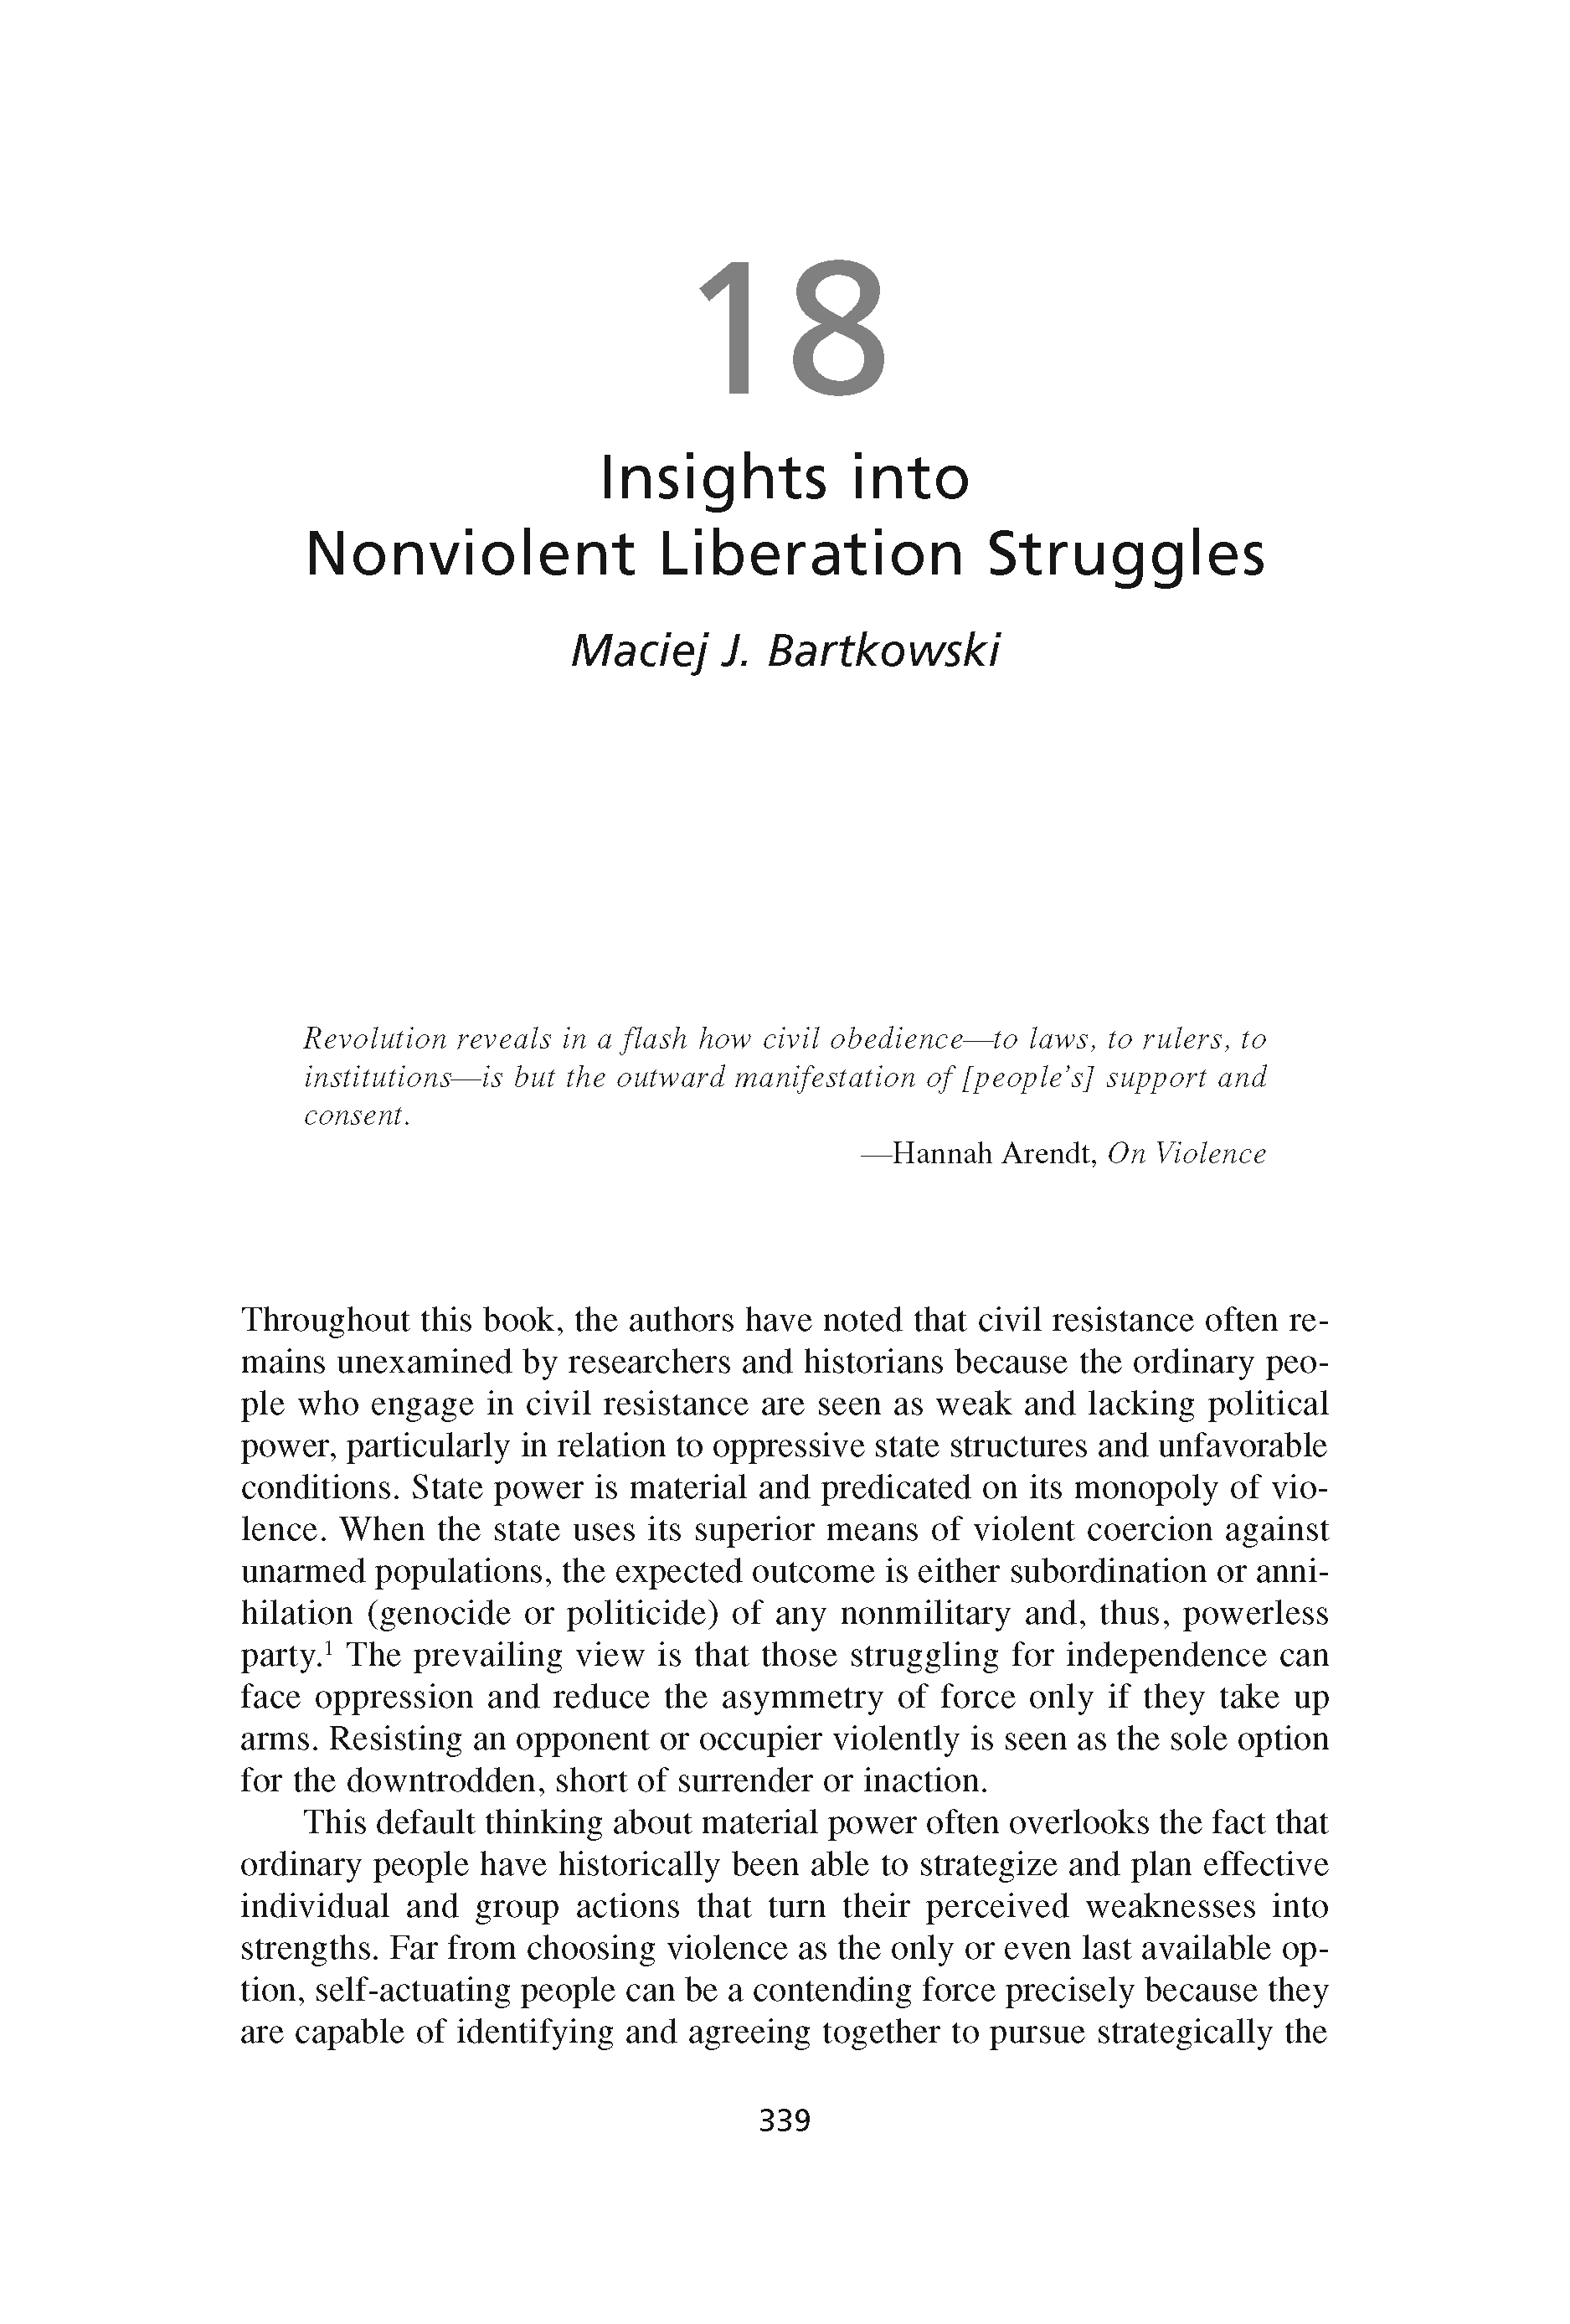 Insights into Nonviolent Liberation Struggles (Chapter 18 from ‘Recovering Nonviolent History’)